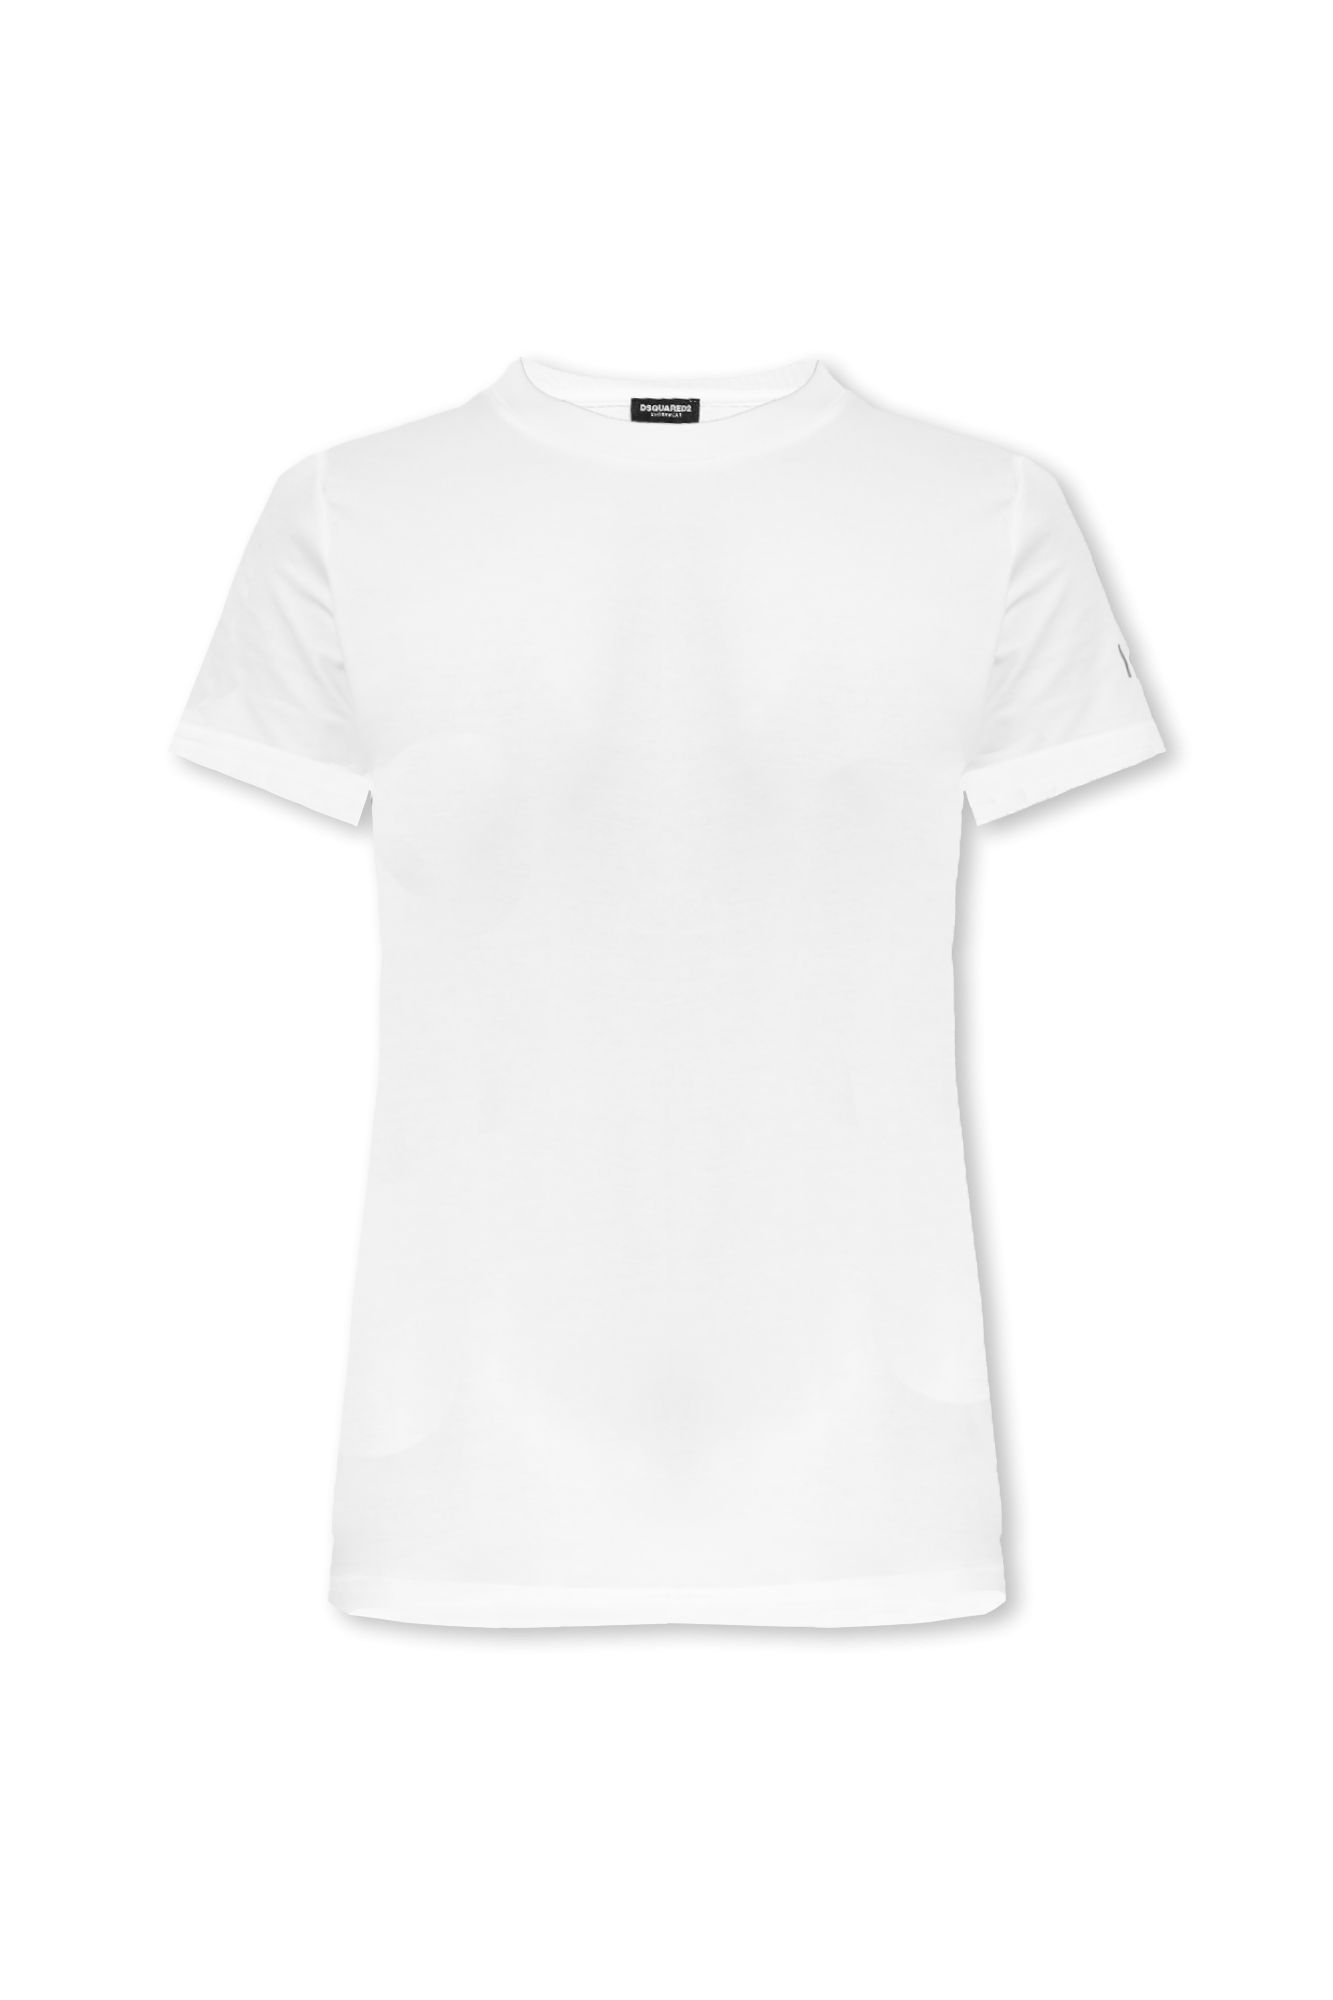 Dsquared2 Cotton T-shirt with logo